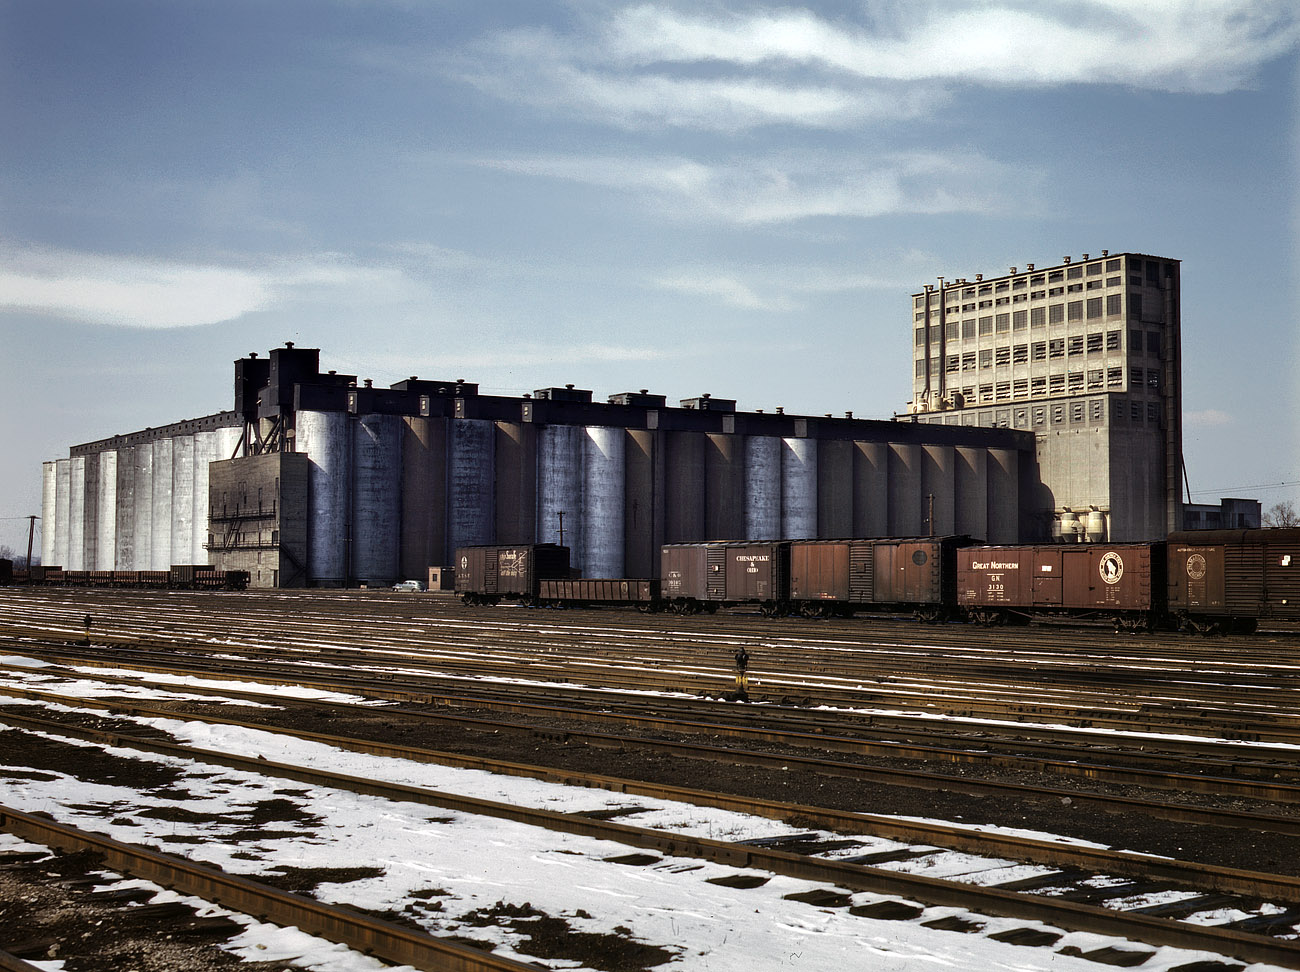 March 1943. The giant Santa Fe Elevator near Kansas City, demolished in the 1990s, held 10 million bushels of grain. View full size. 4x5 Kodachrome transparency by Jack Delano, Farm Security Administration/OWI.